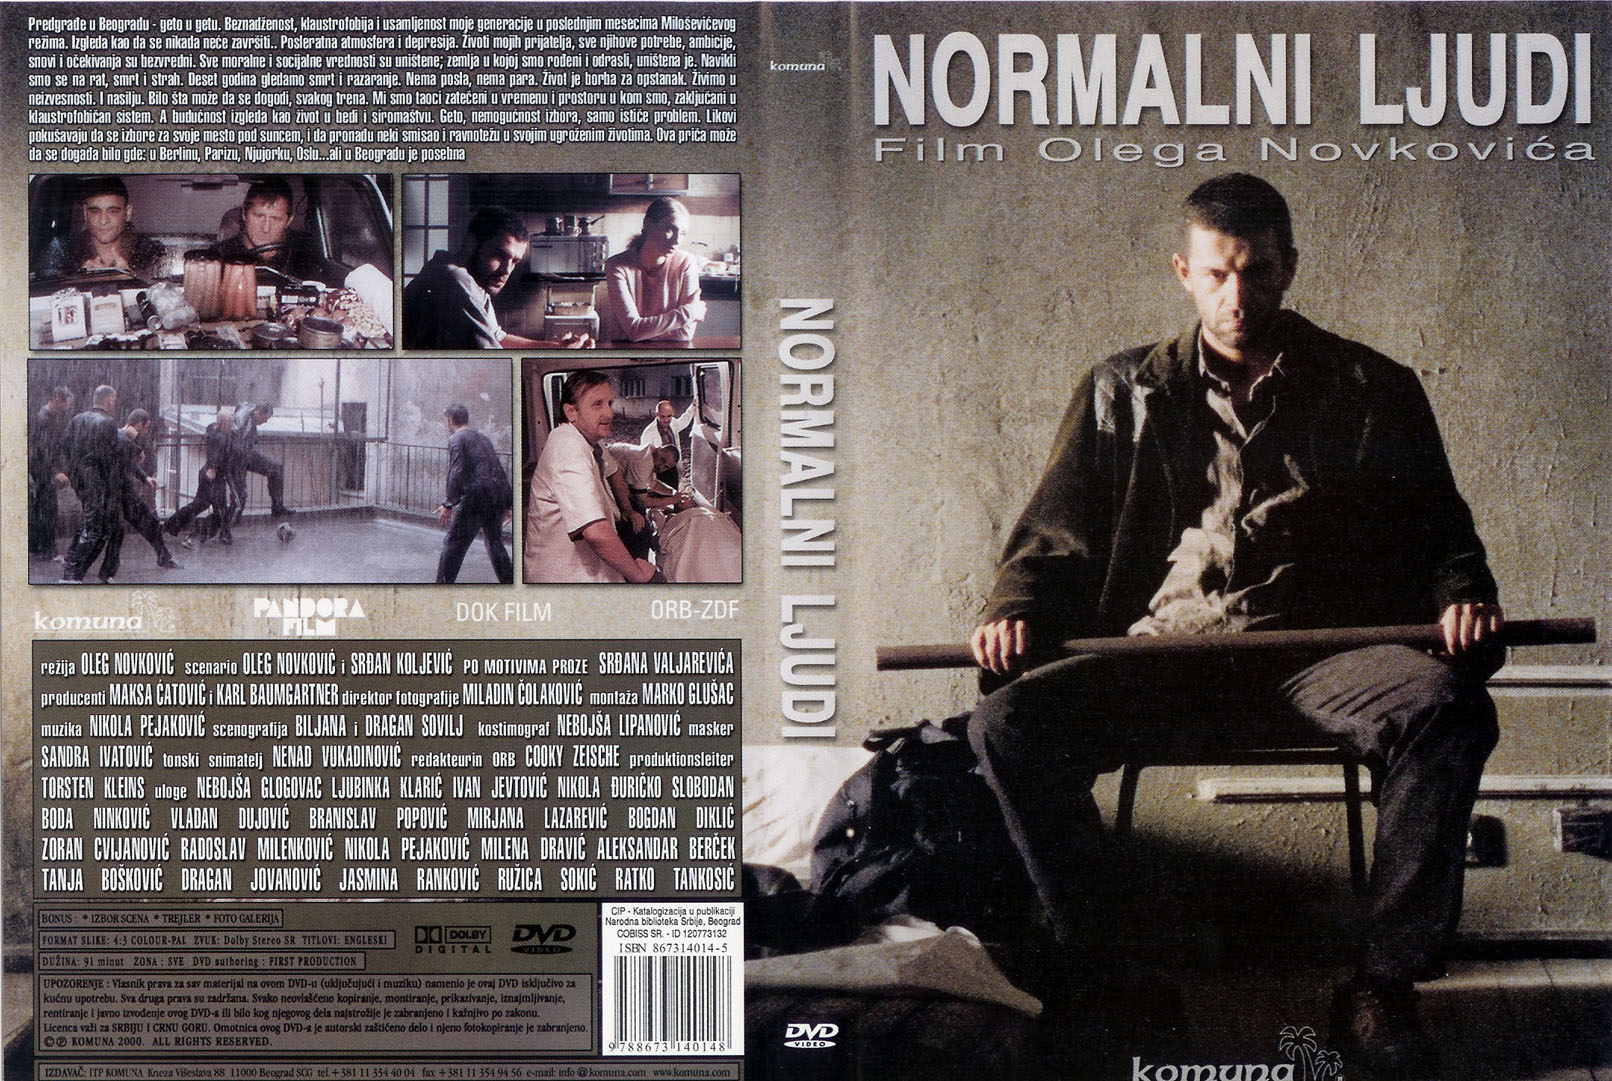 Click to view full size image -  DVD Cover - N - normalni_ljudi_dvd - normalni_ljudi_dvd.jpg